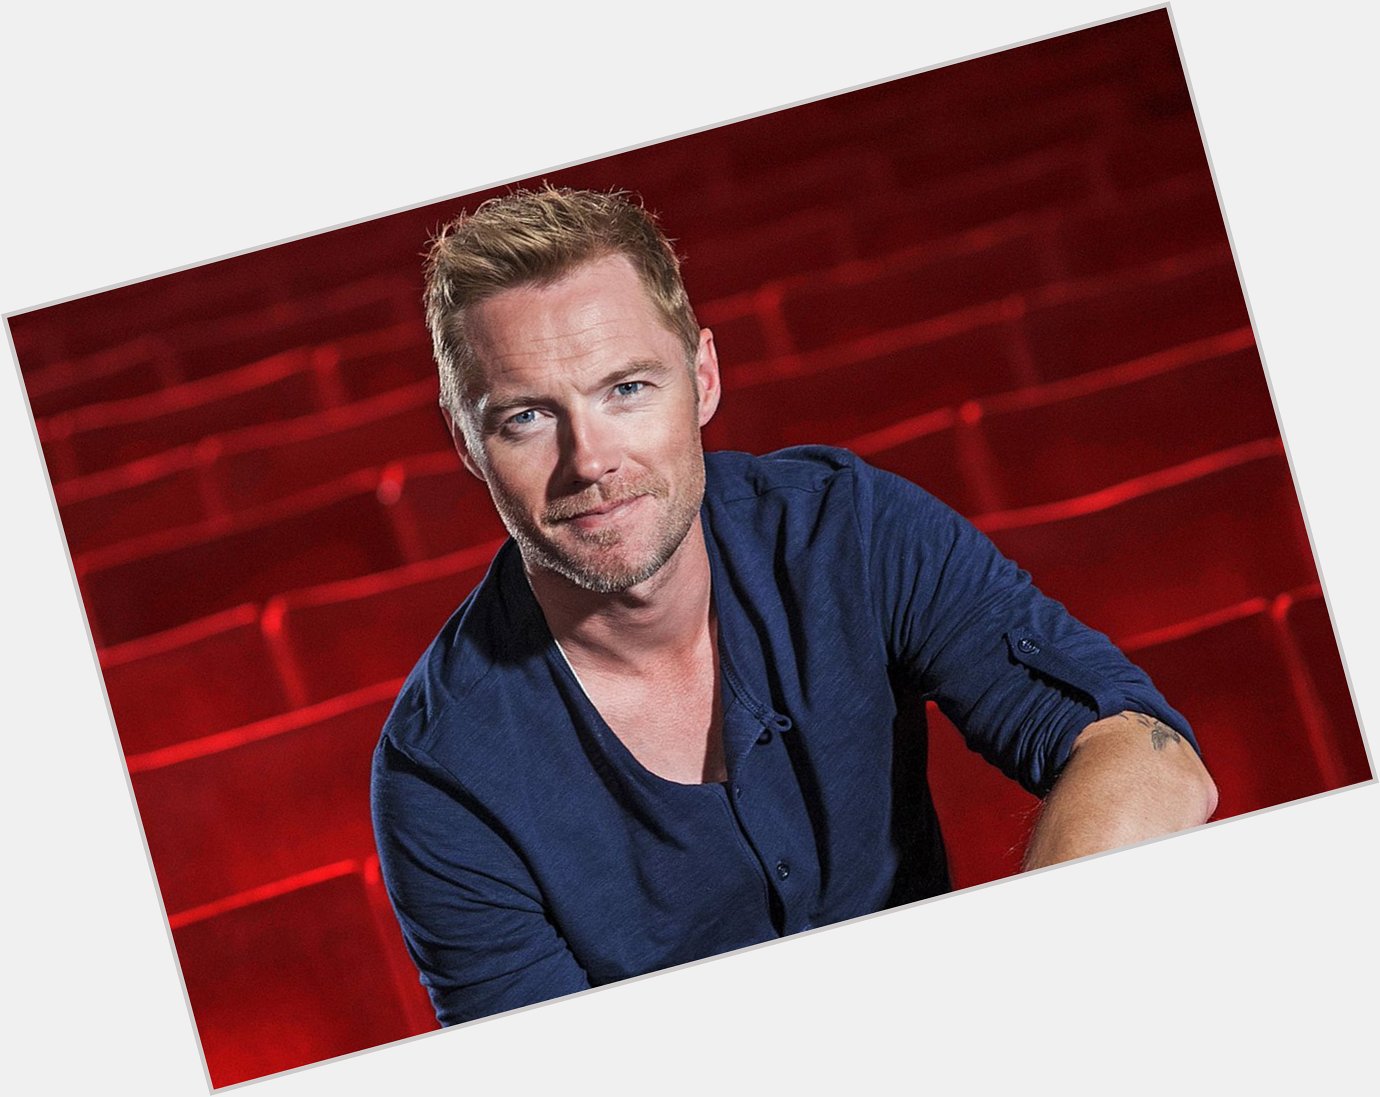  ON WITH Wishes:
Ronan Keating A Happy Birthday! 